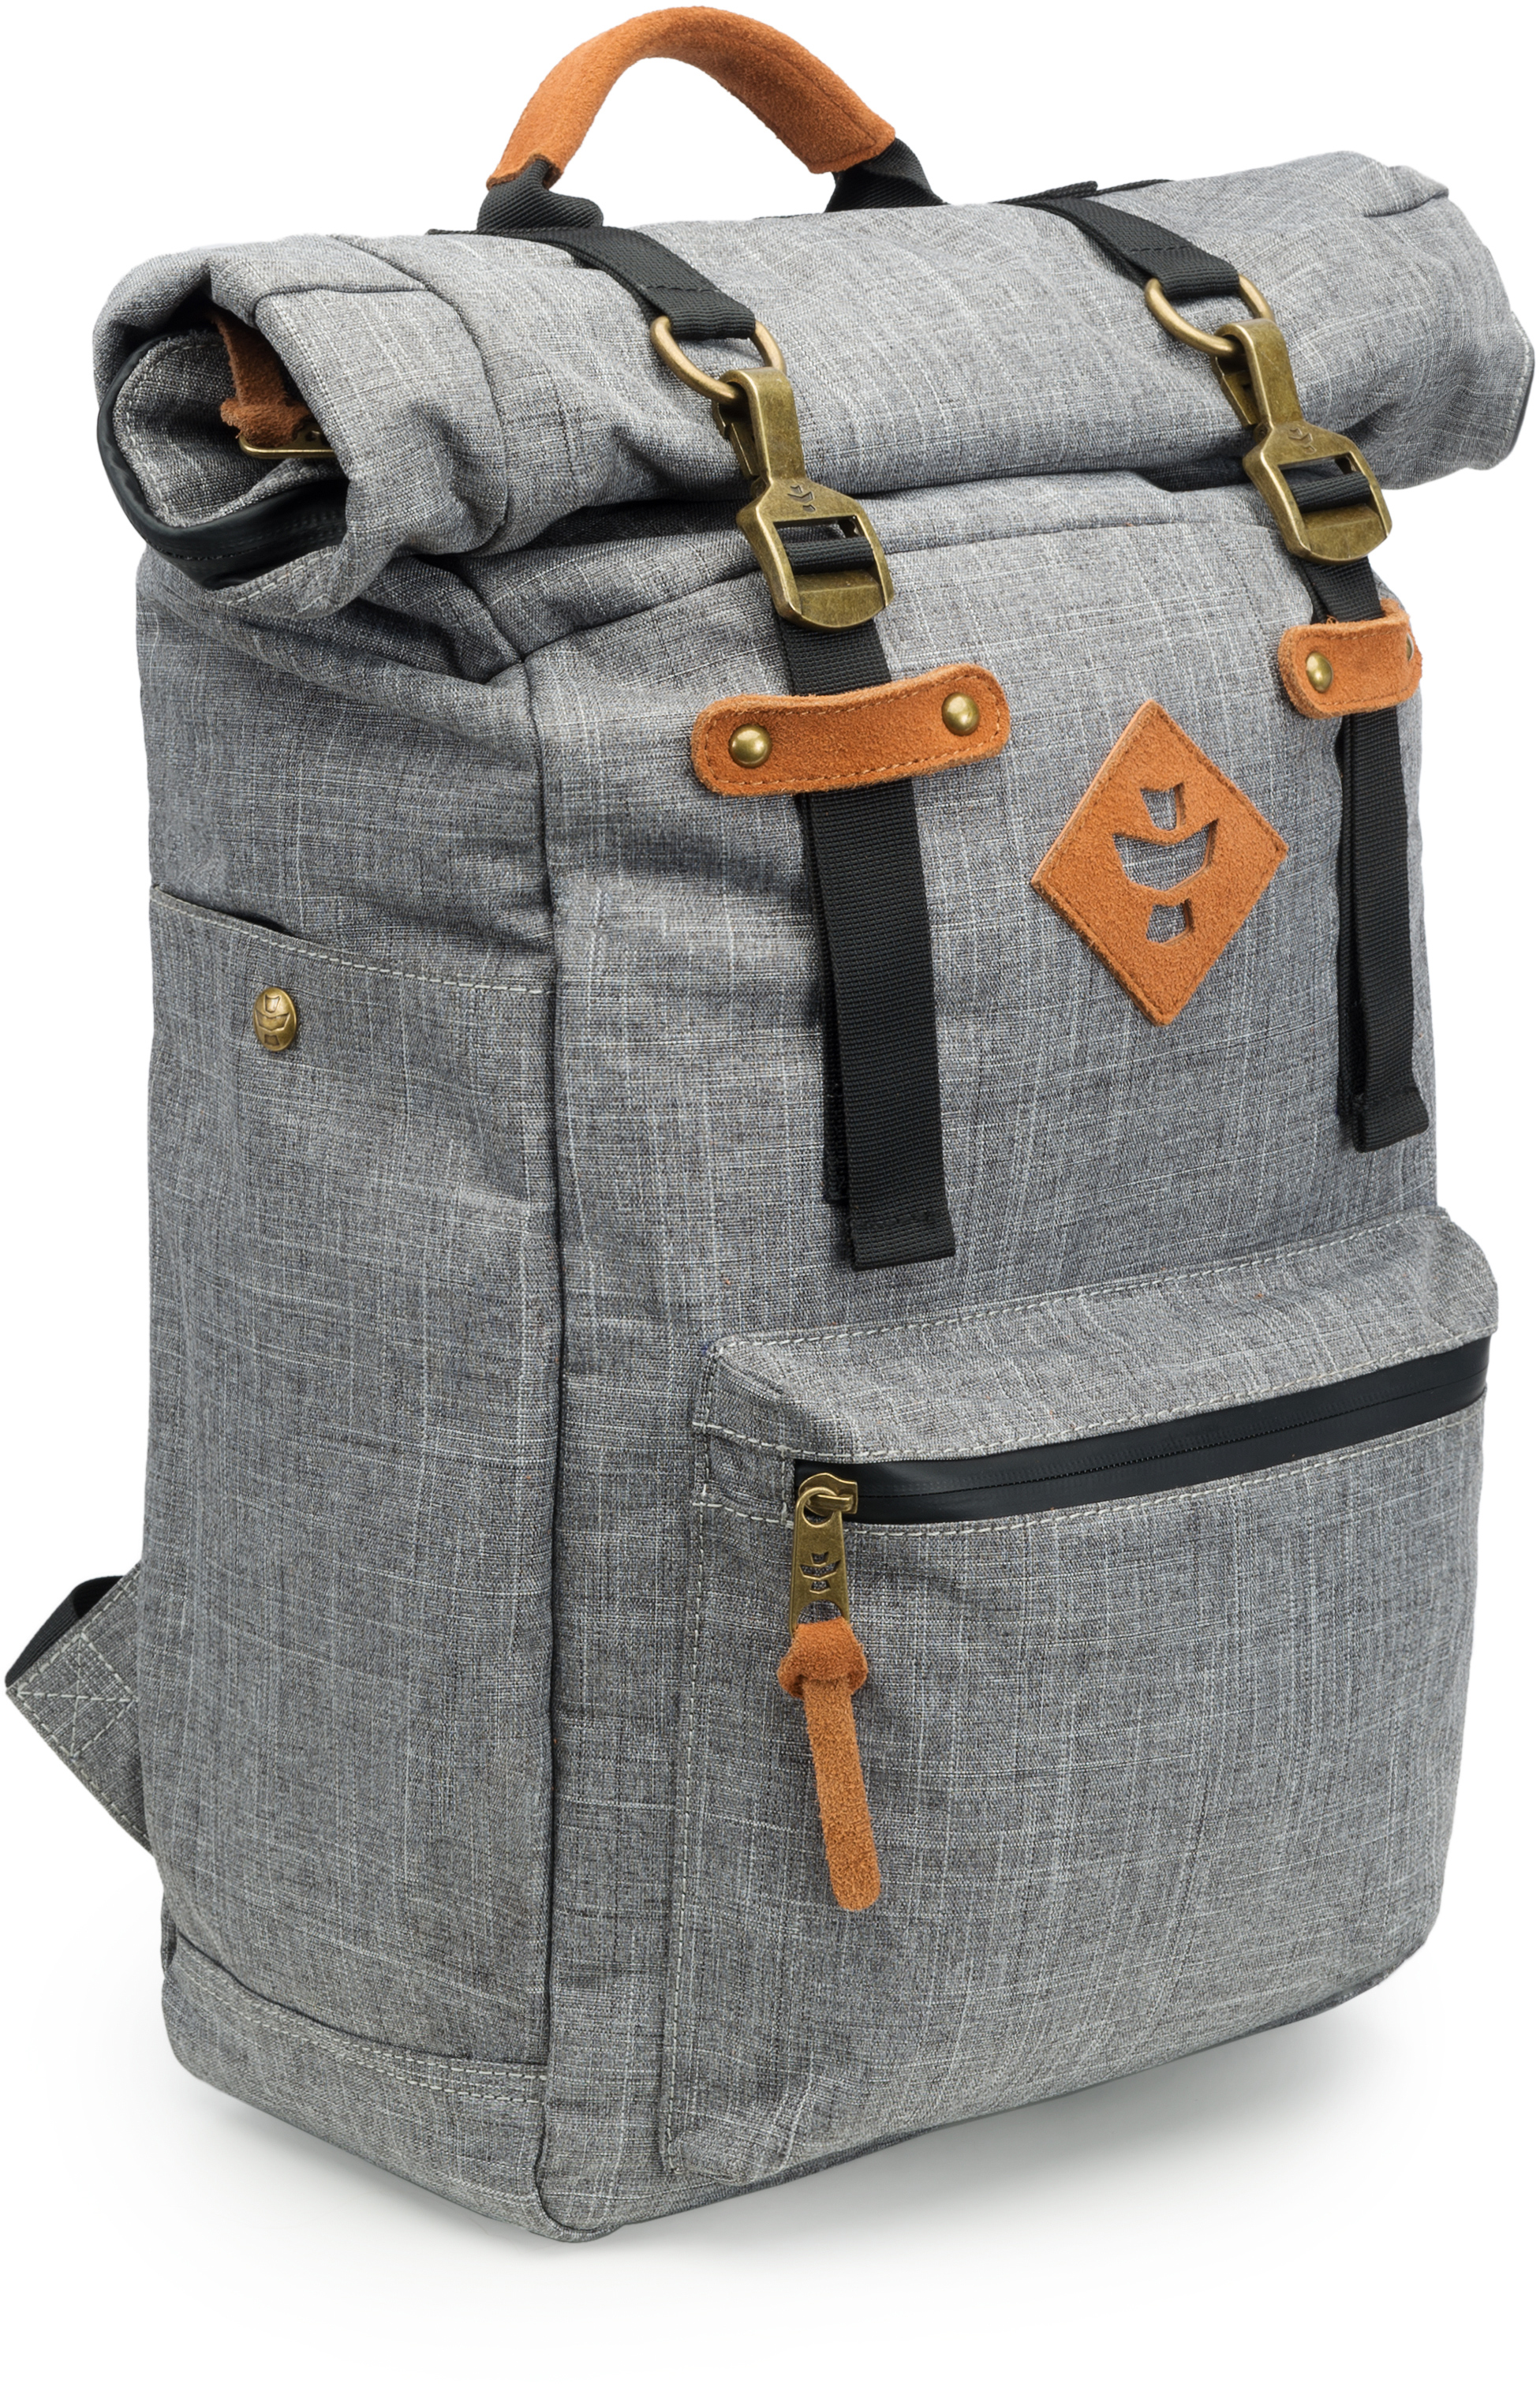 Picture for Revelry Supply The Drifter Rolltop Backpack, Crosshatch Grey